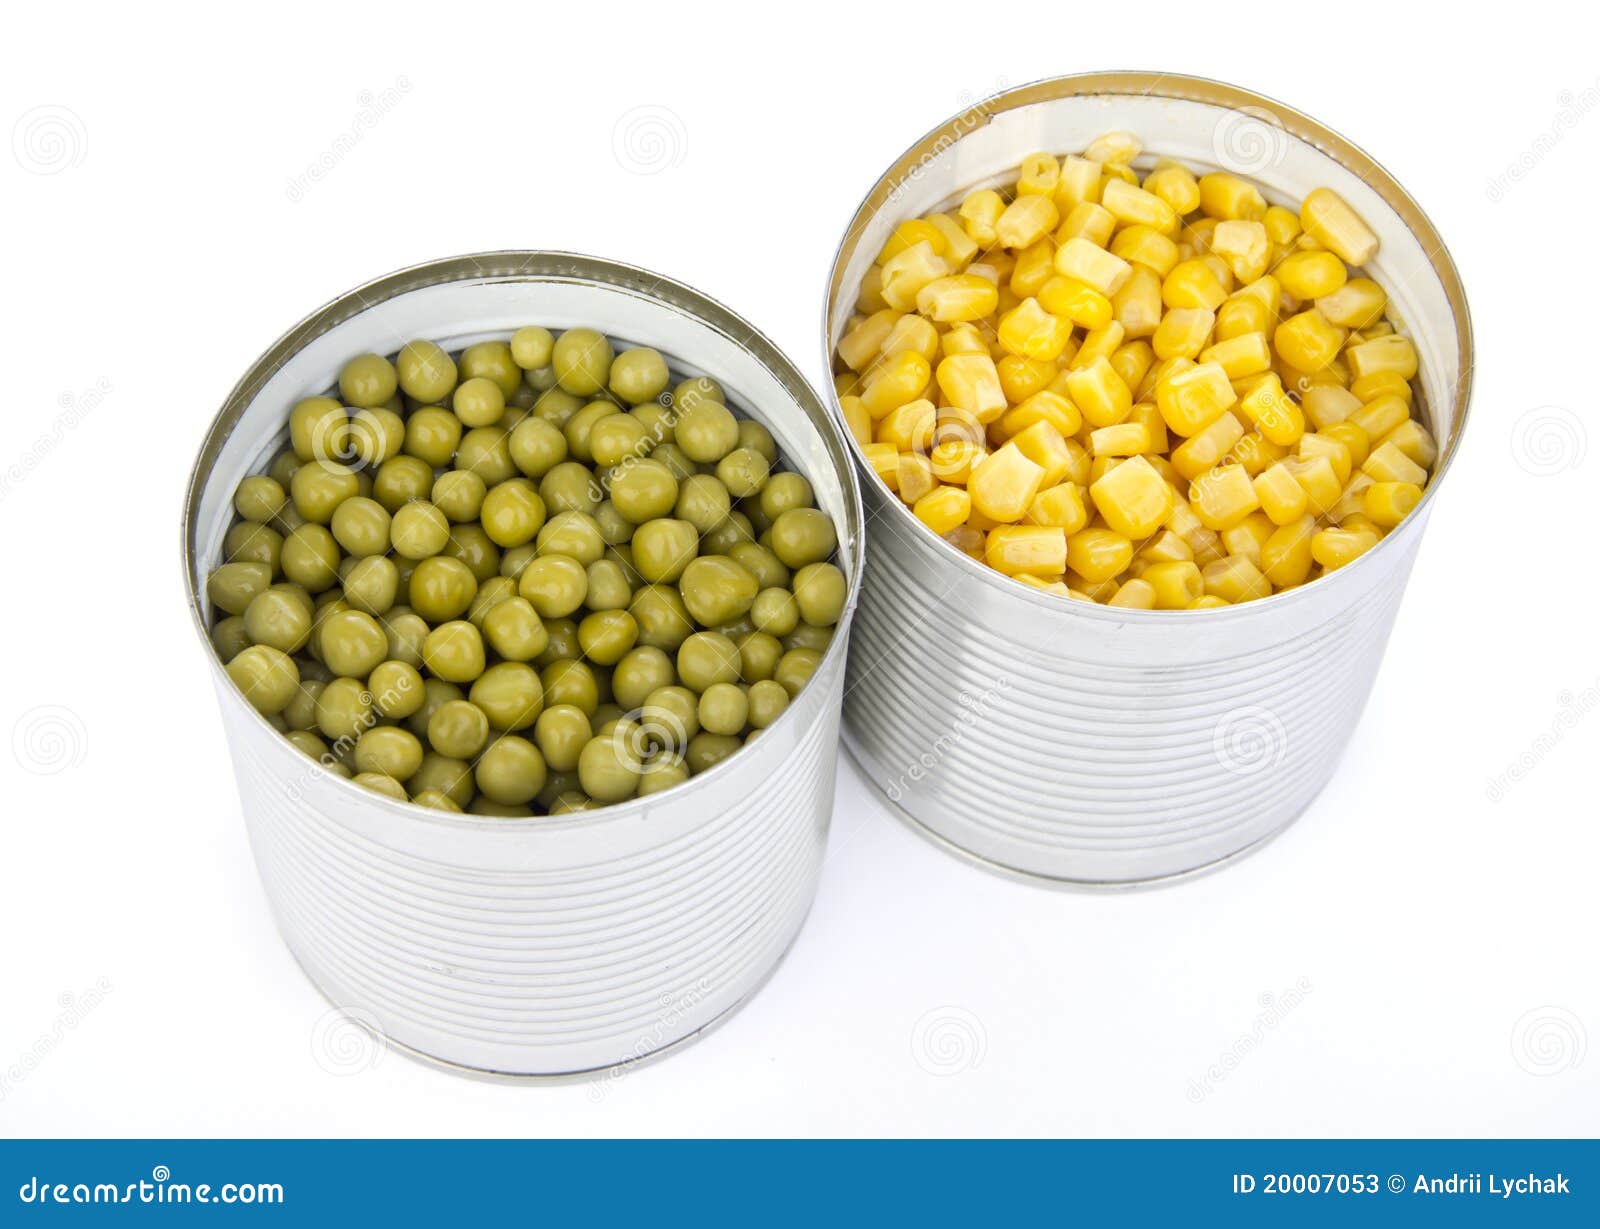 clipart canned vegetables - photo #26